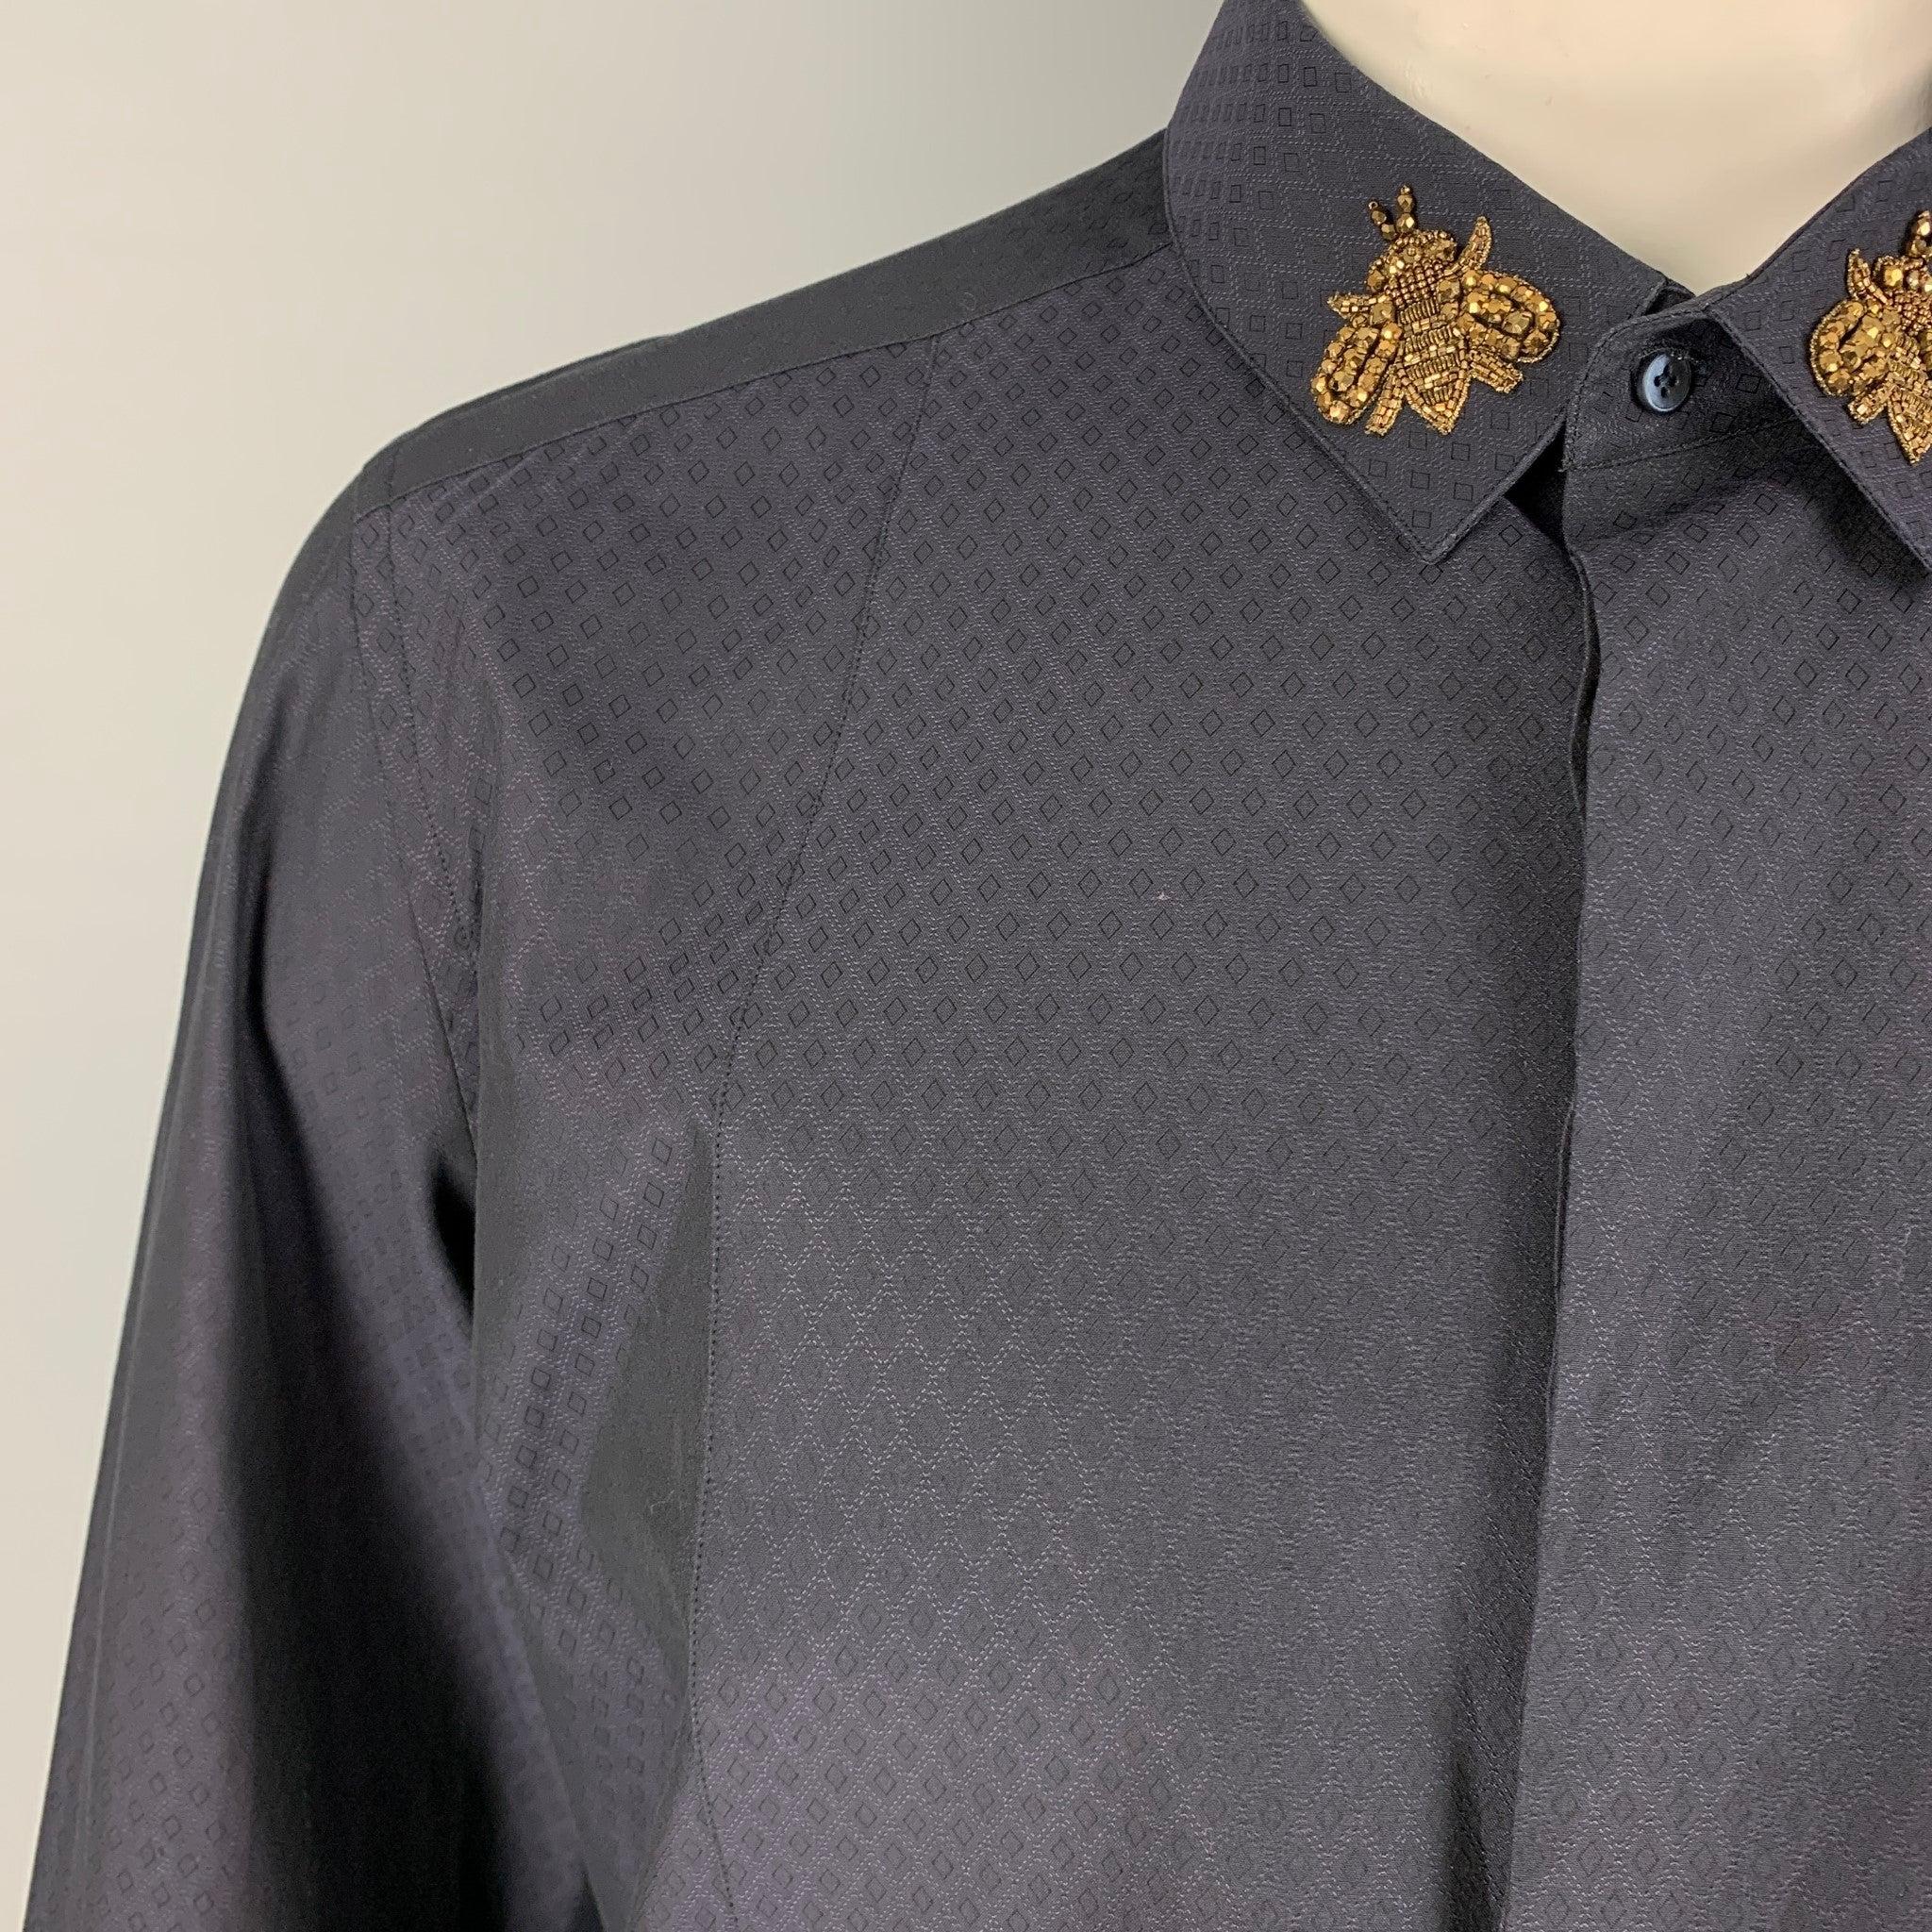 DOLCE & GABBANA long sleeve shirt comes in a navy rhombus print cotton featuring a beaded 